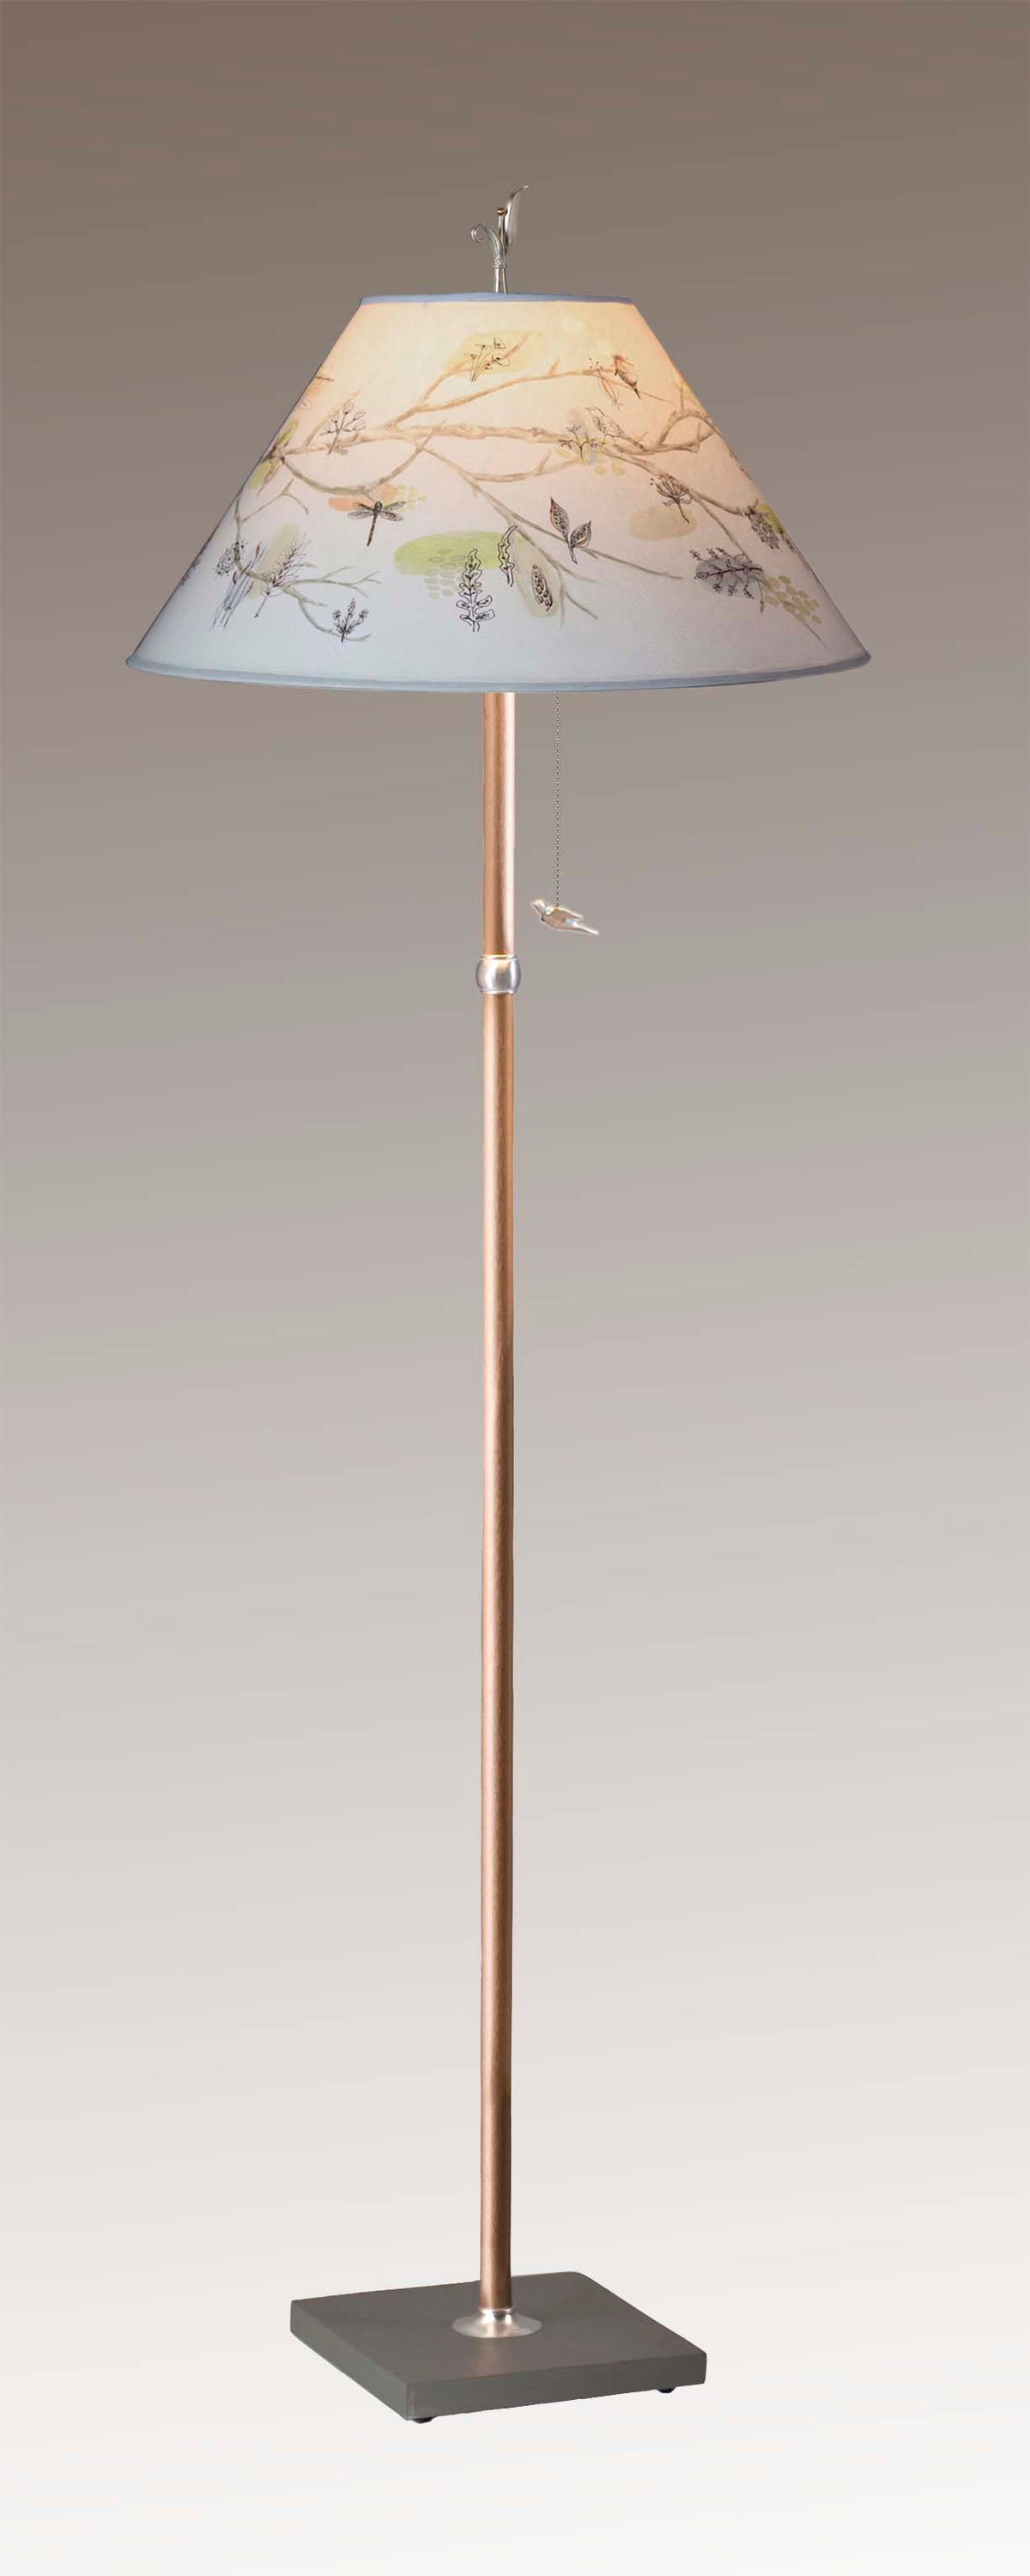 Copper Floor Lamp with Large Conical Shade in Artful Branch